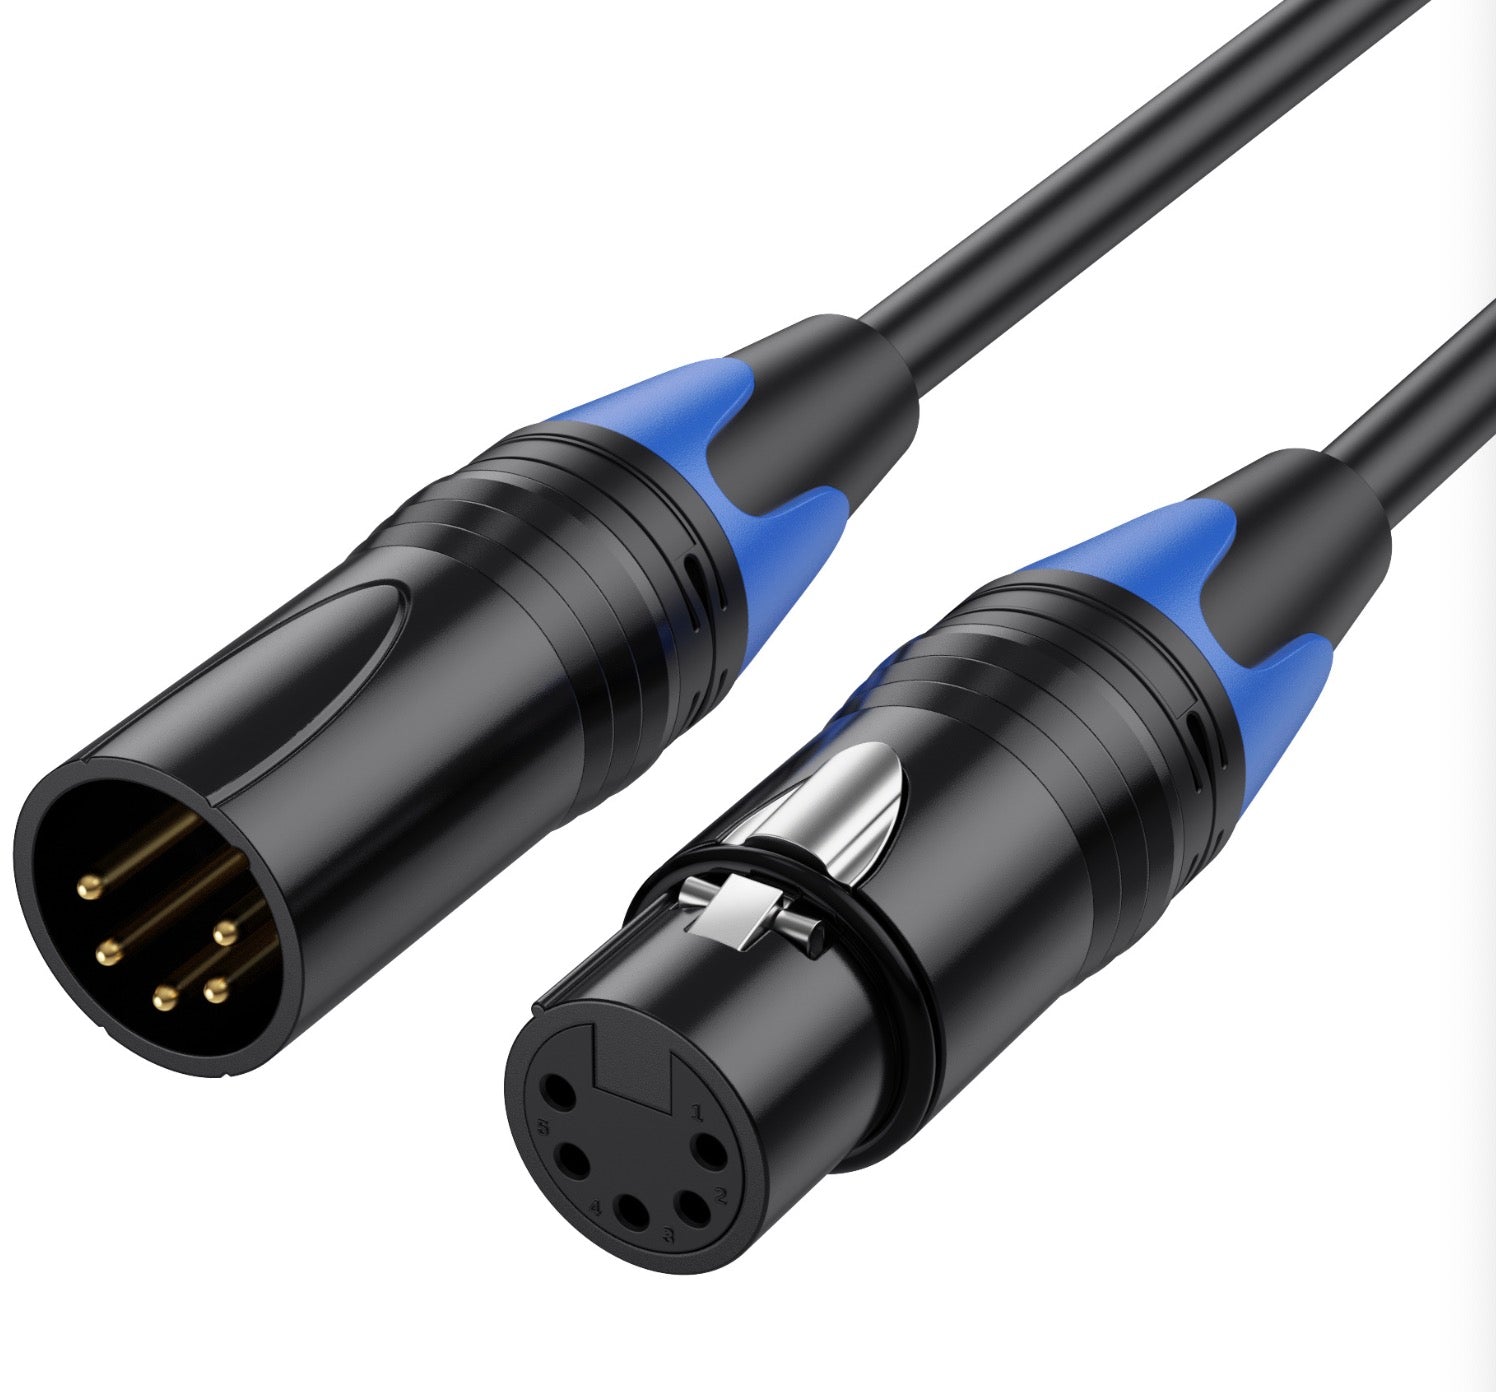 5 Pin XLR Male to Female DMX Cable For DMX512